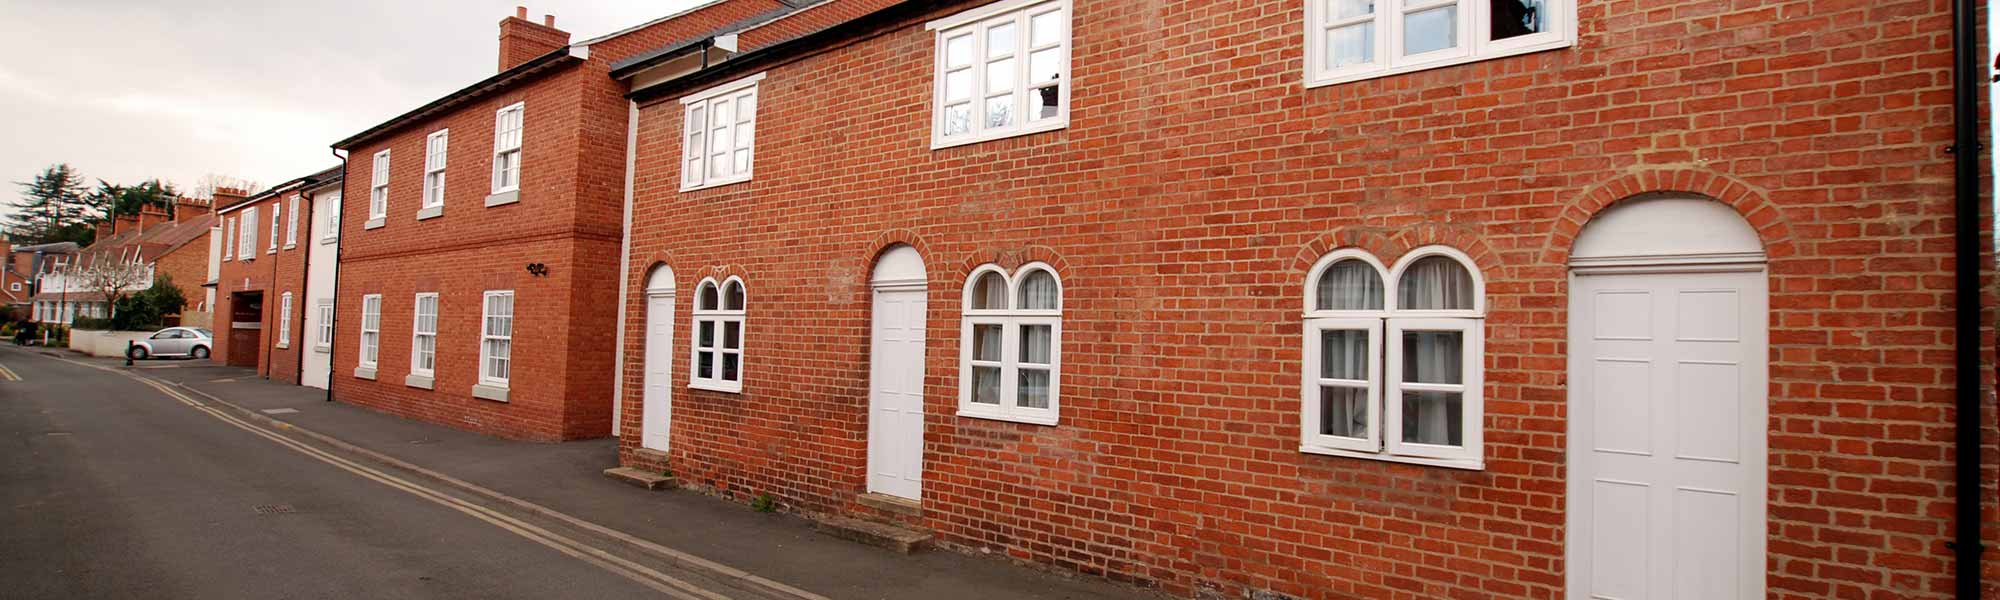 Scholars Mews Private Care Home in Stratford upon Avon